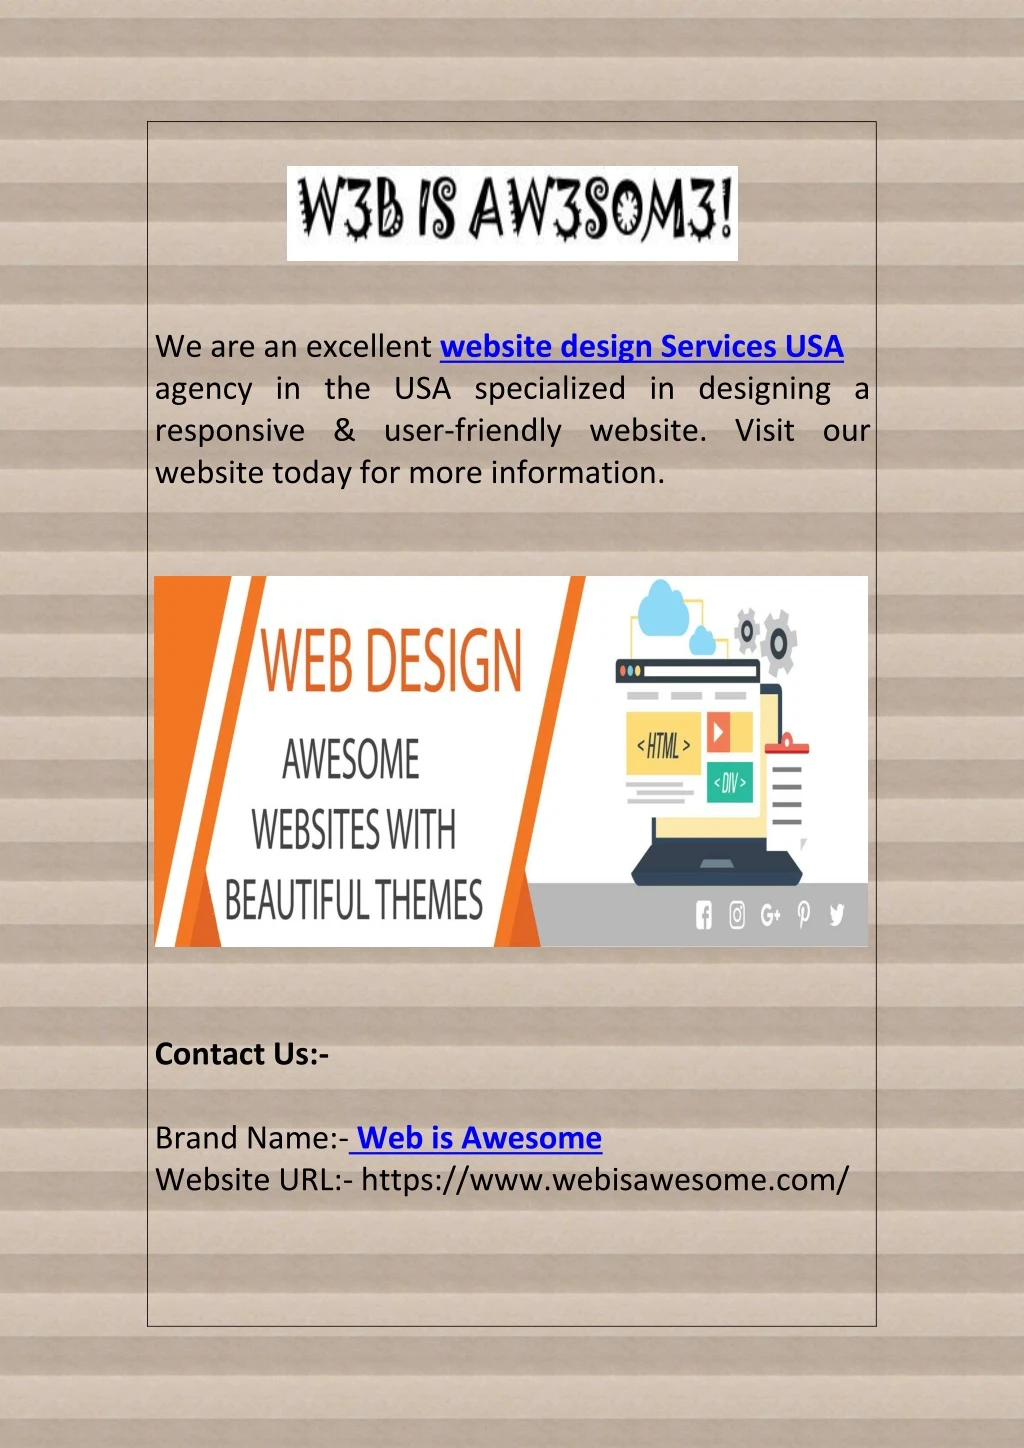 we are an excellent website design services